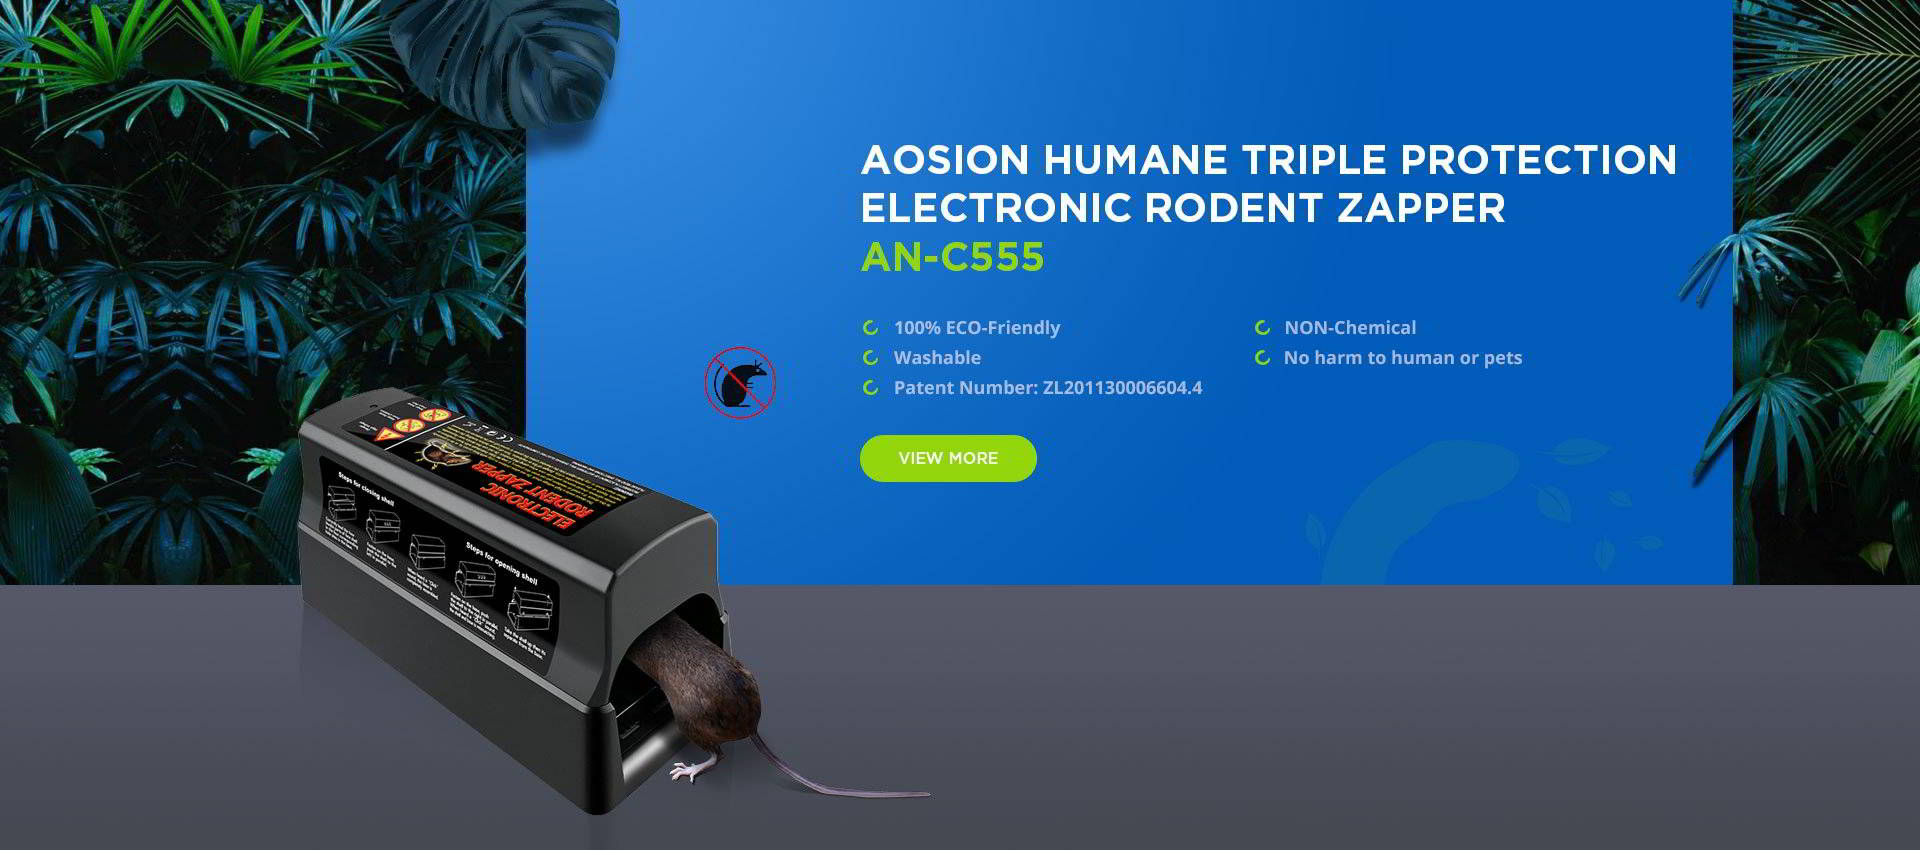 AOSION Humane Triple Protection Electronic Rodent Zapper